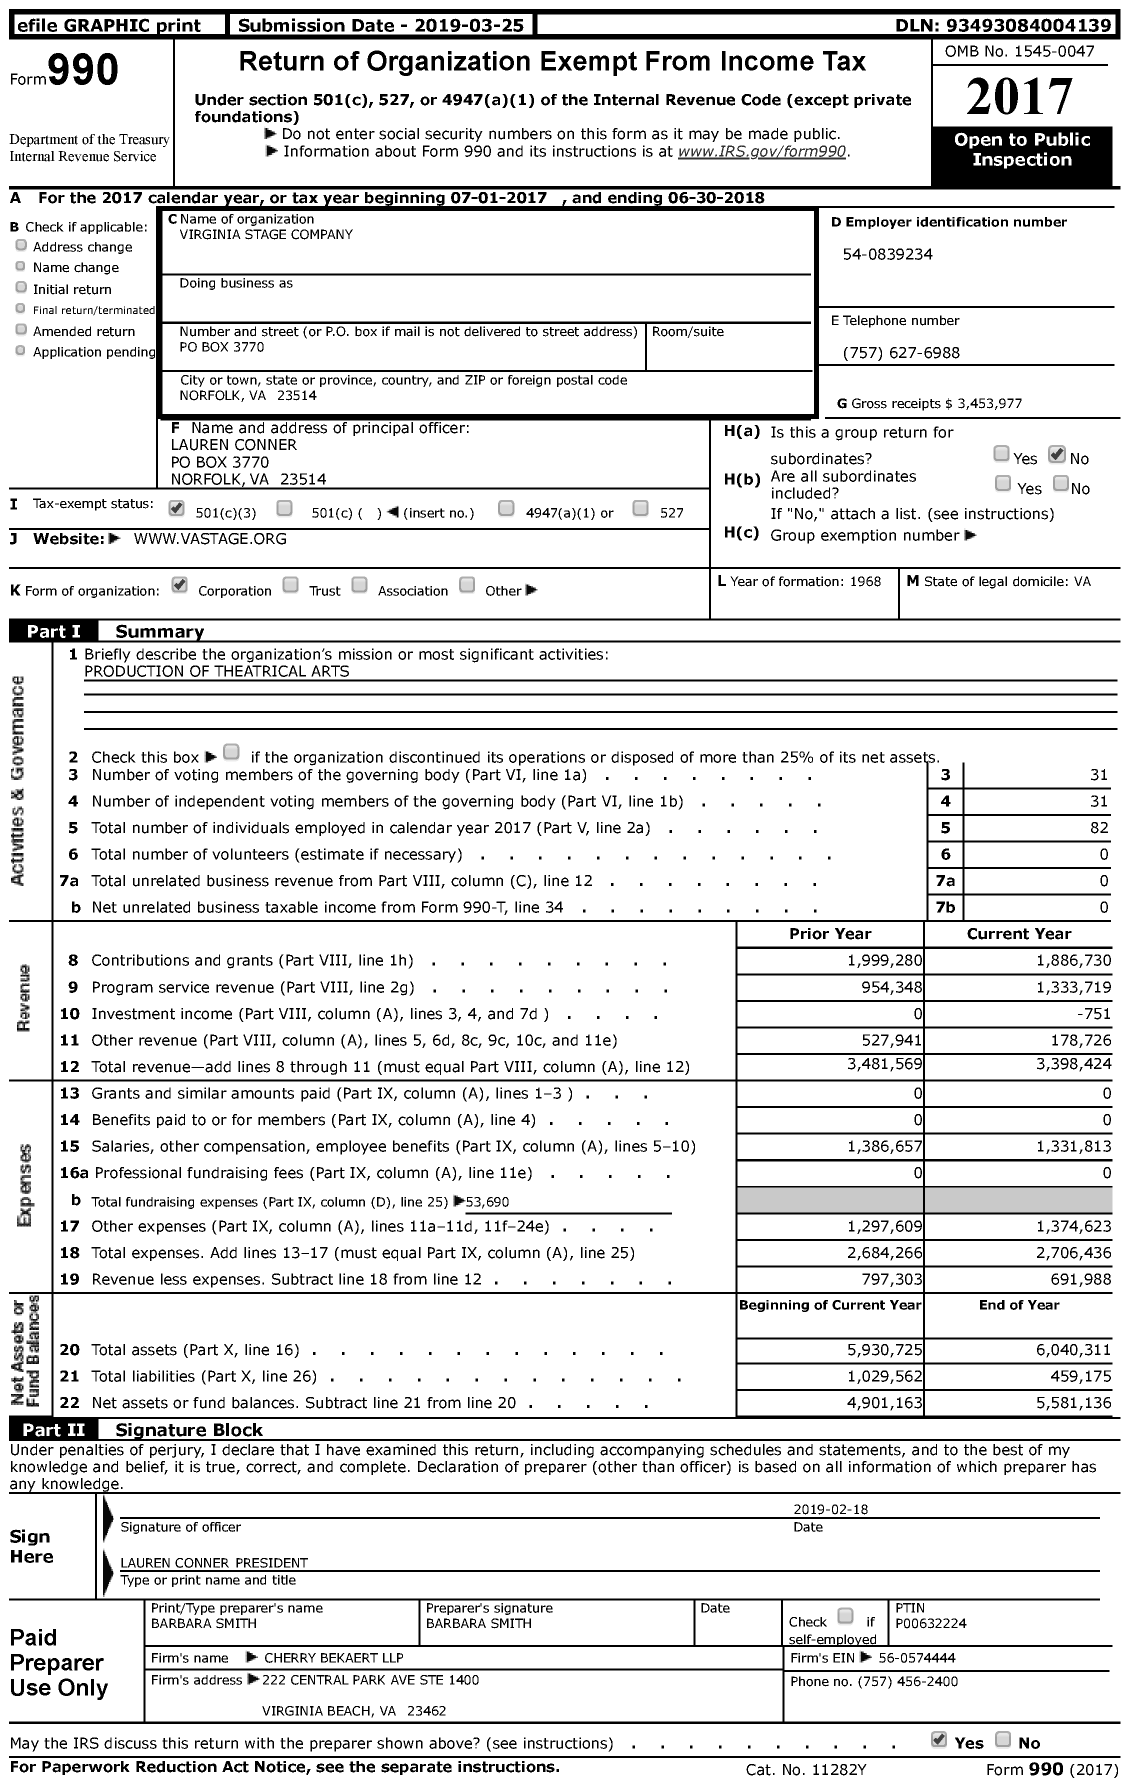 Image of first page of 2017 Form 990 for Virginia Stage Company (VSC)